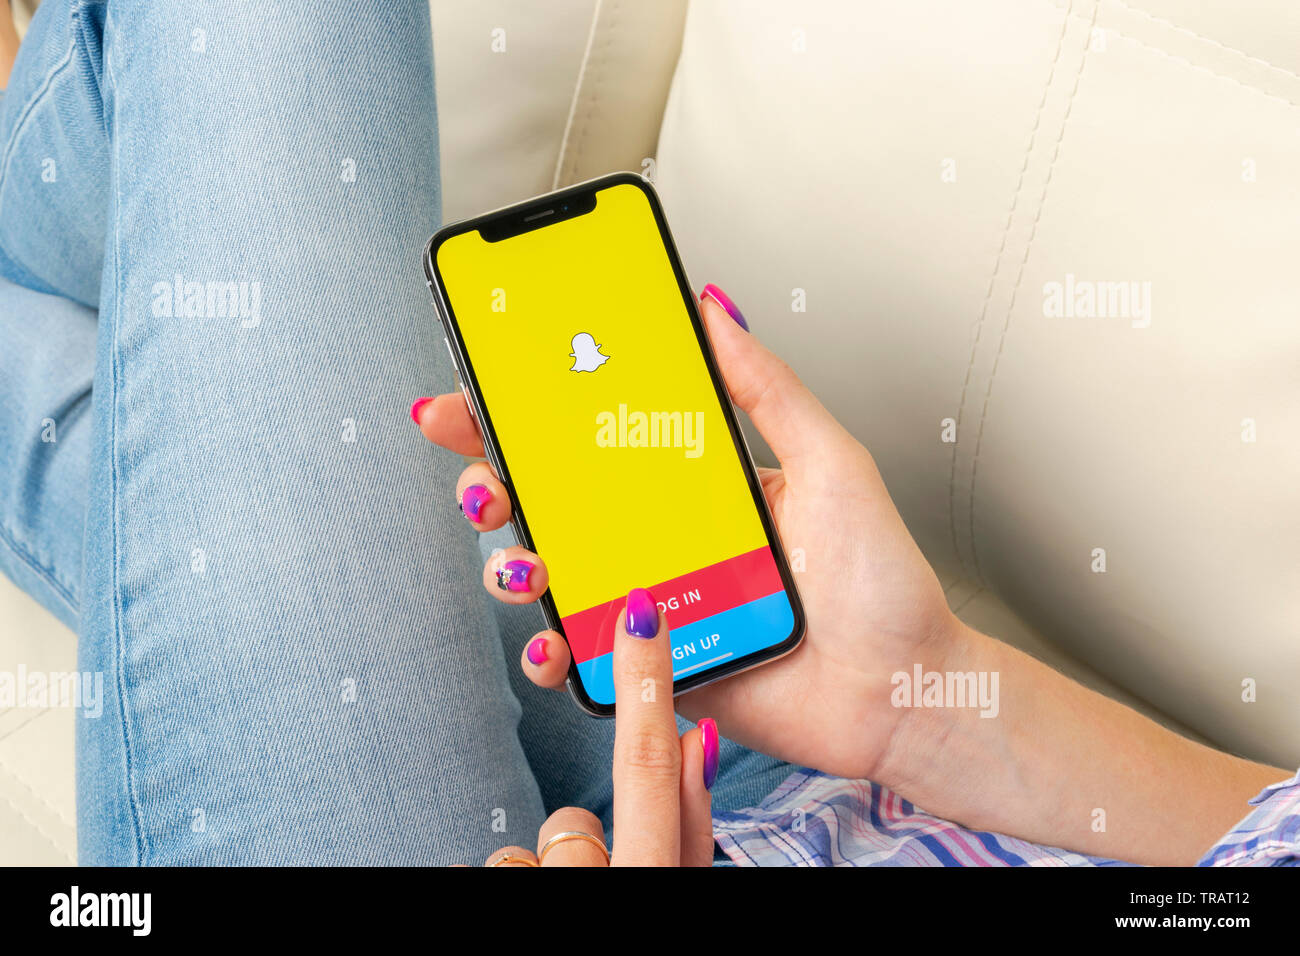 Sankt-Petersburg, Russia, May 30, 2018: Snapchat application icon on Apple iPhone X smartphone screen close-up in woman hands. Snapchat app icon. Soci Stock Photo